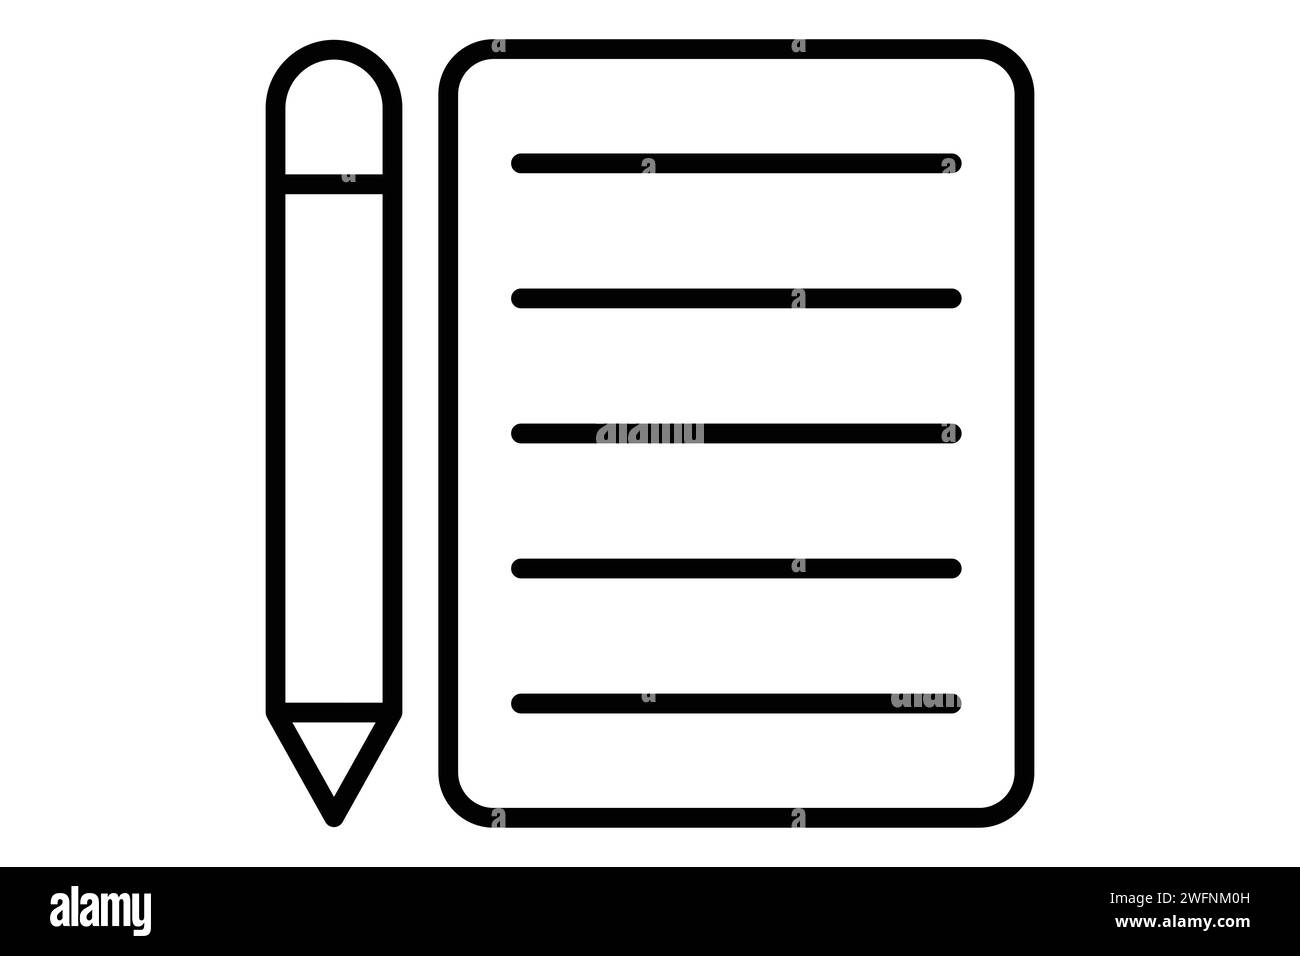 Pencil and Notepad icon. icon related to lesson planning and note-taking. line icon style. element illustration Stock Vector